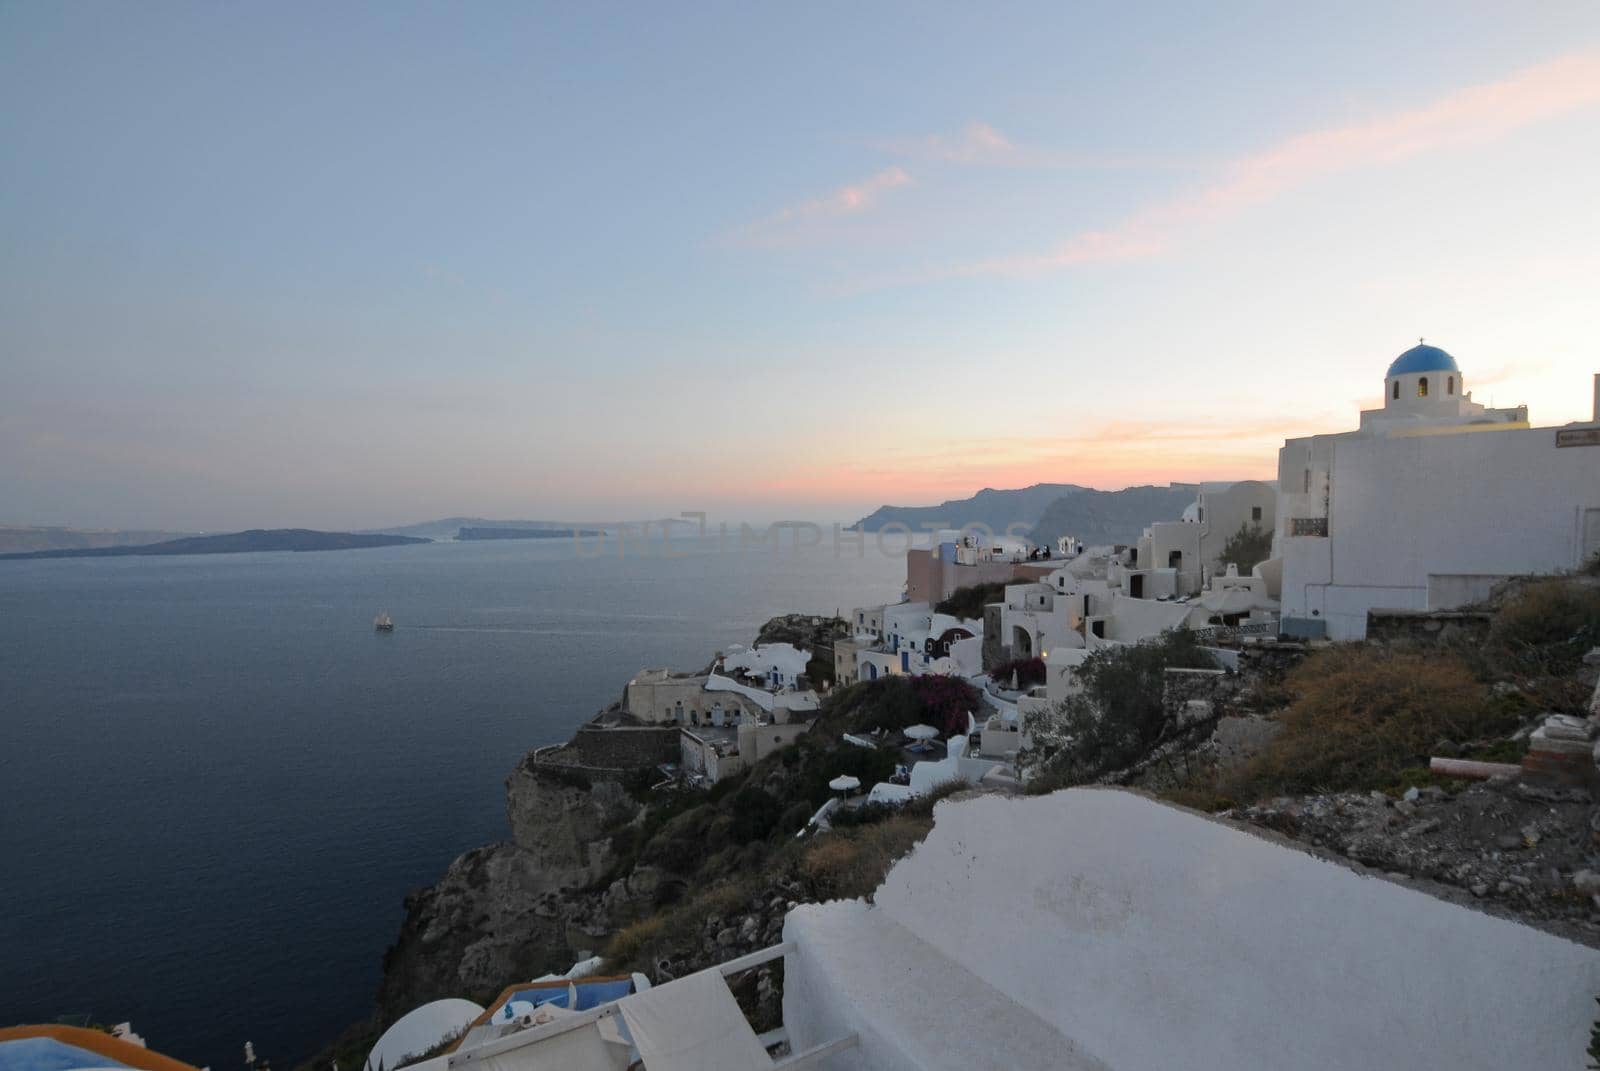 image from the famous view over the village of Oia at the Island Santorini, Greece